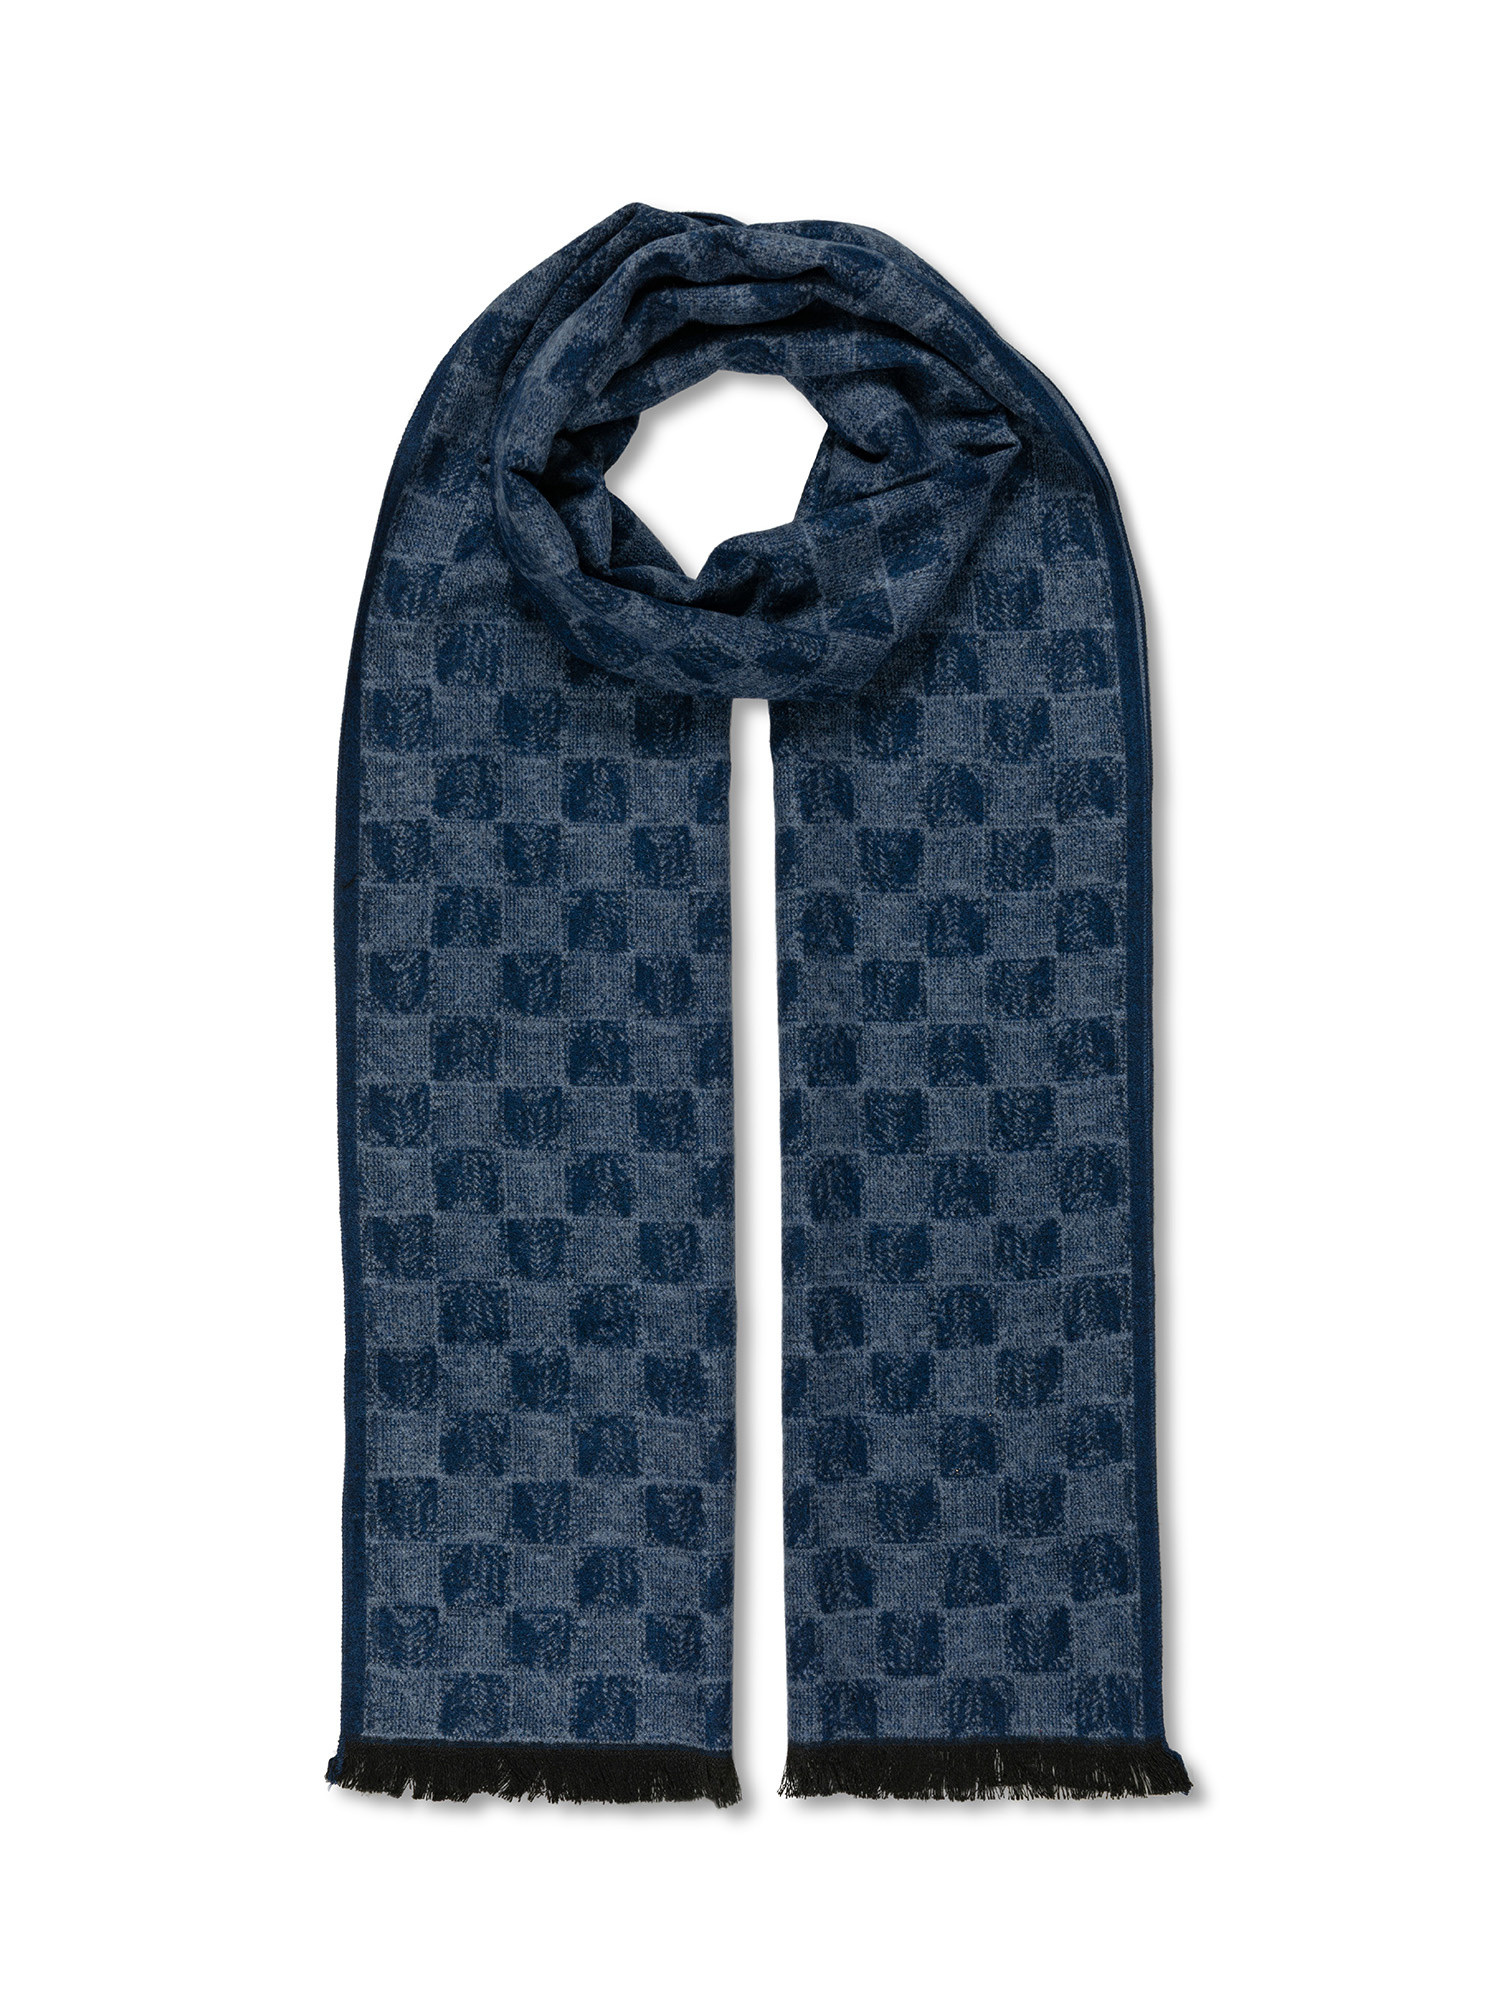 Luca D'Altieri - Checkerboard scarf, Blue, large image number 0